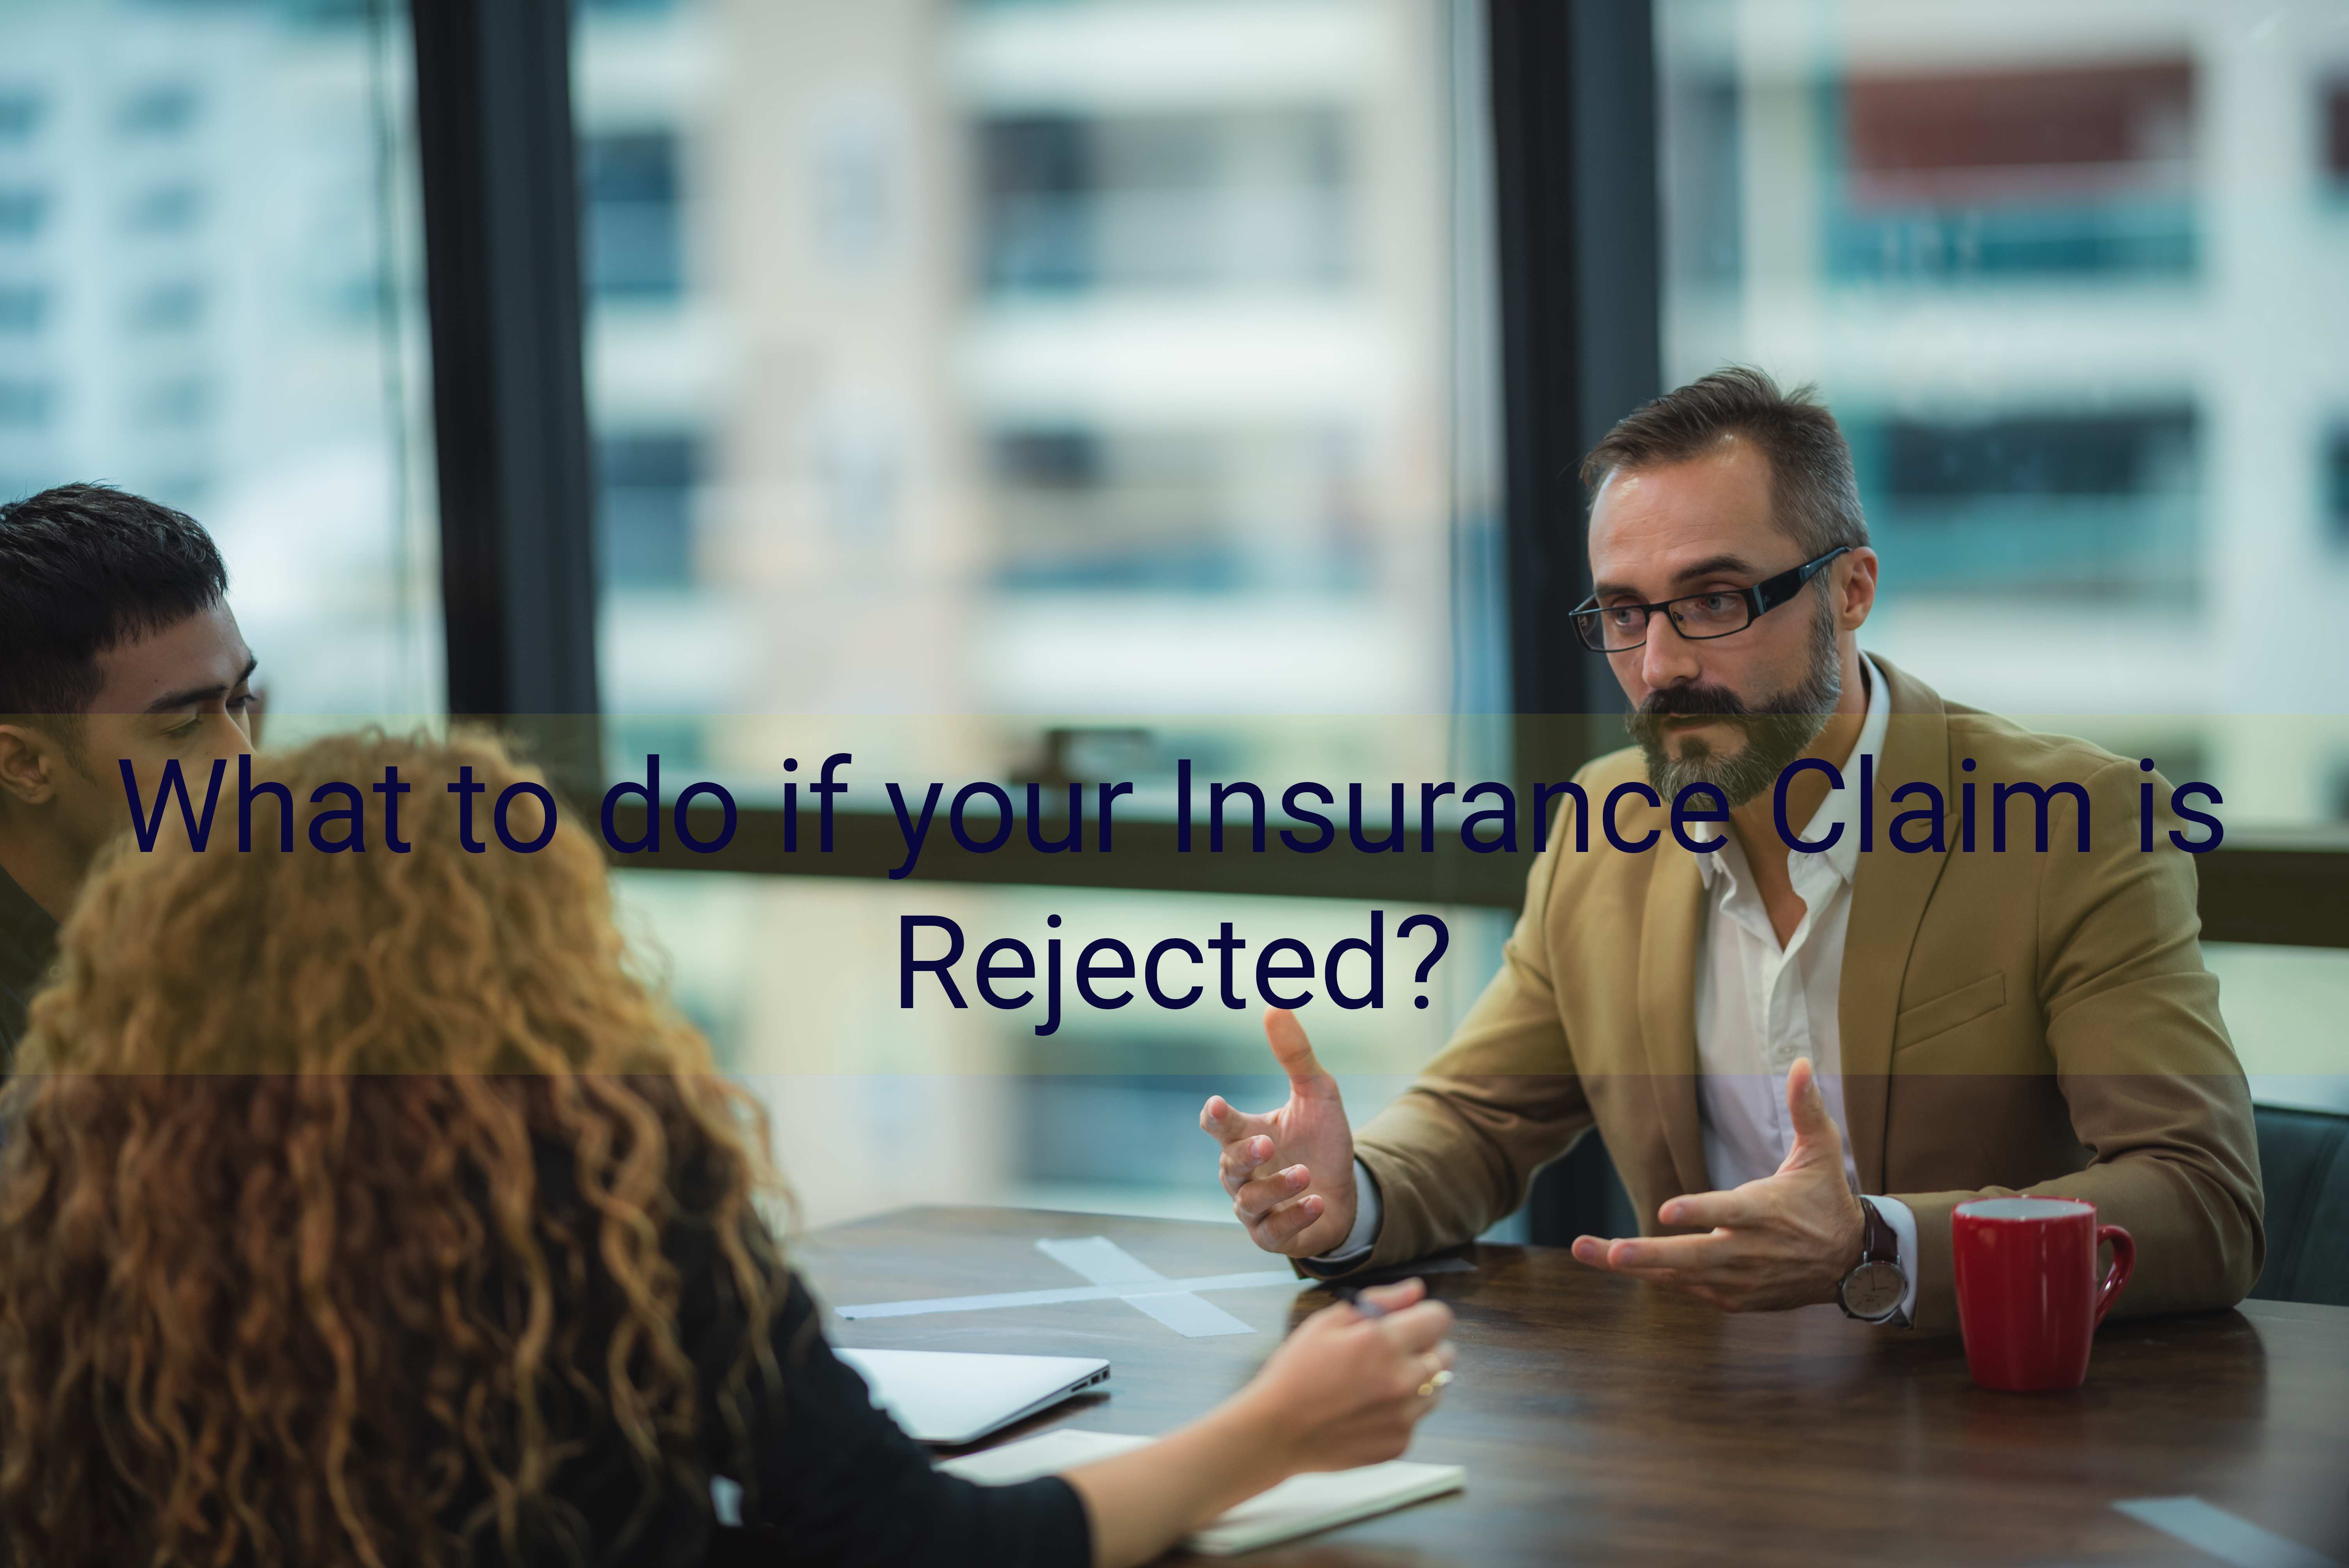 disccussion-insurance-claims-might-rejected-featured-image